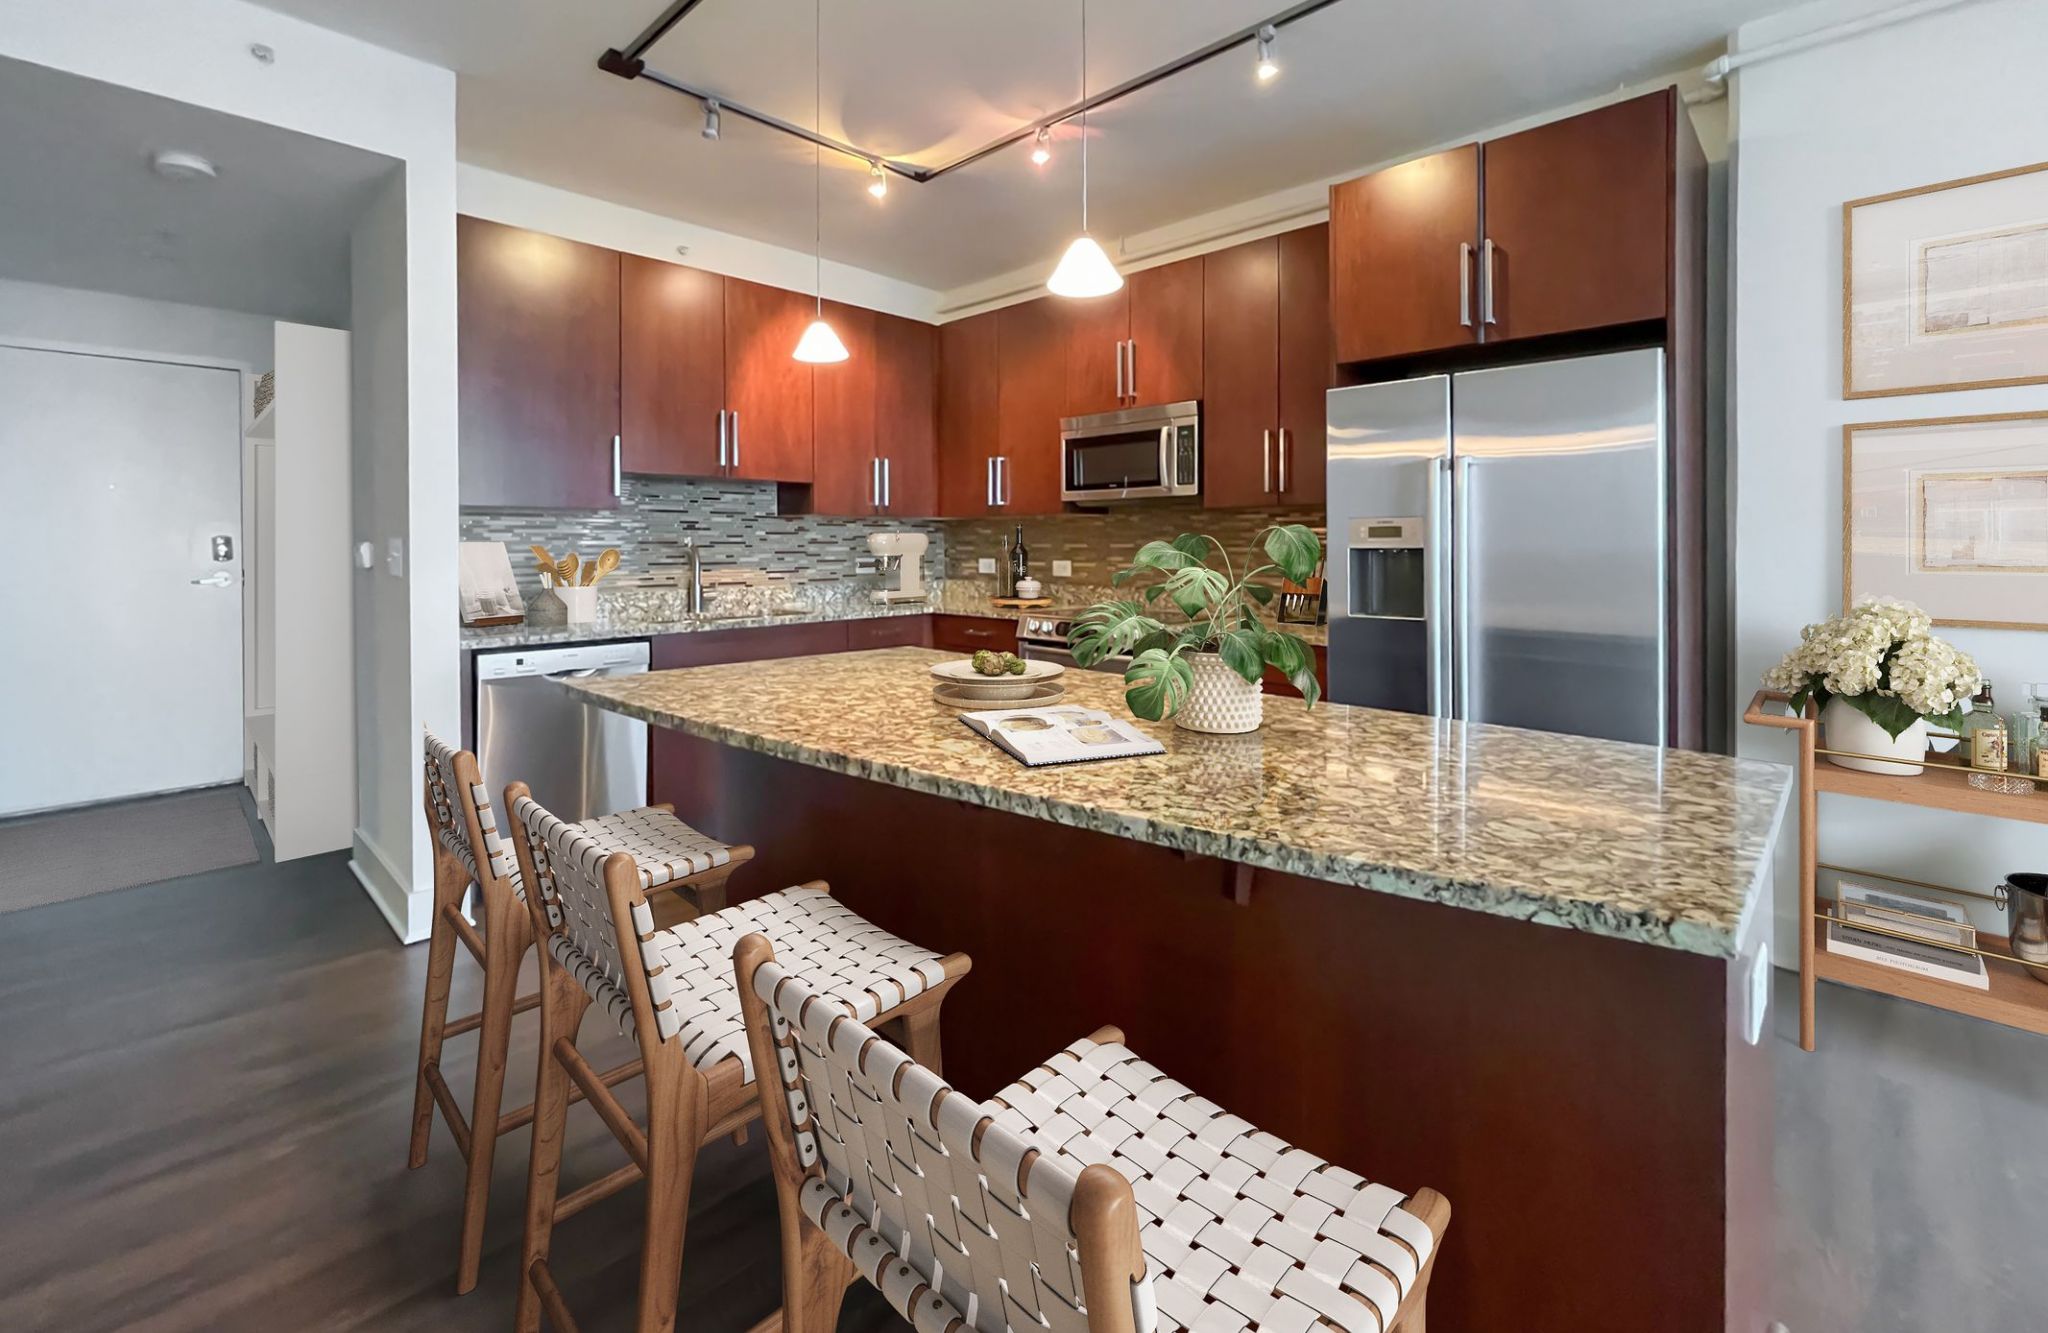 The Vue Charolotte apartment kitchen with granite countertops, stainless steel appliances, and custom cabinets 